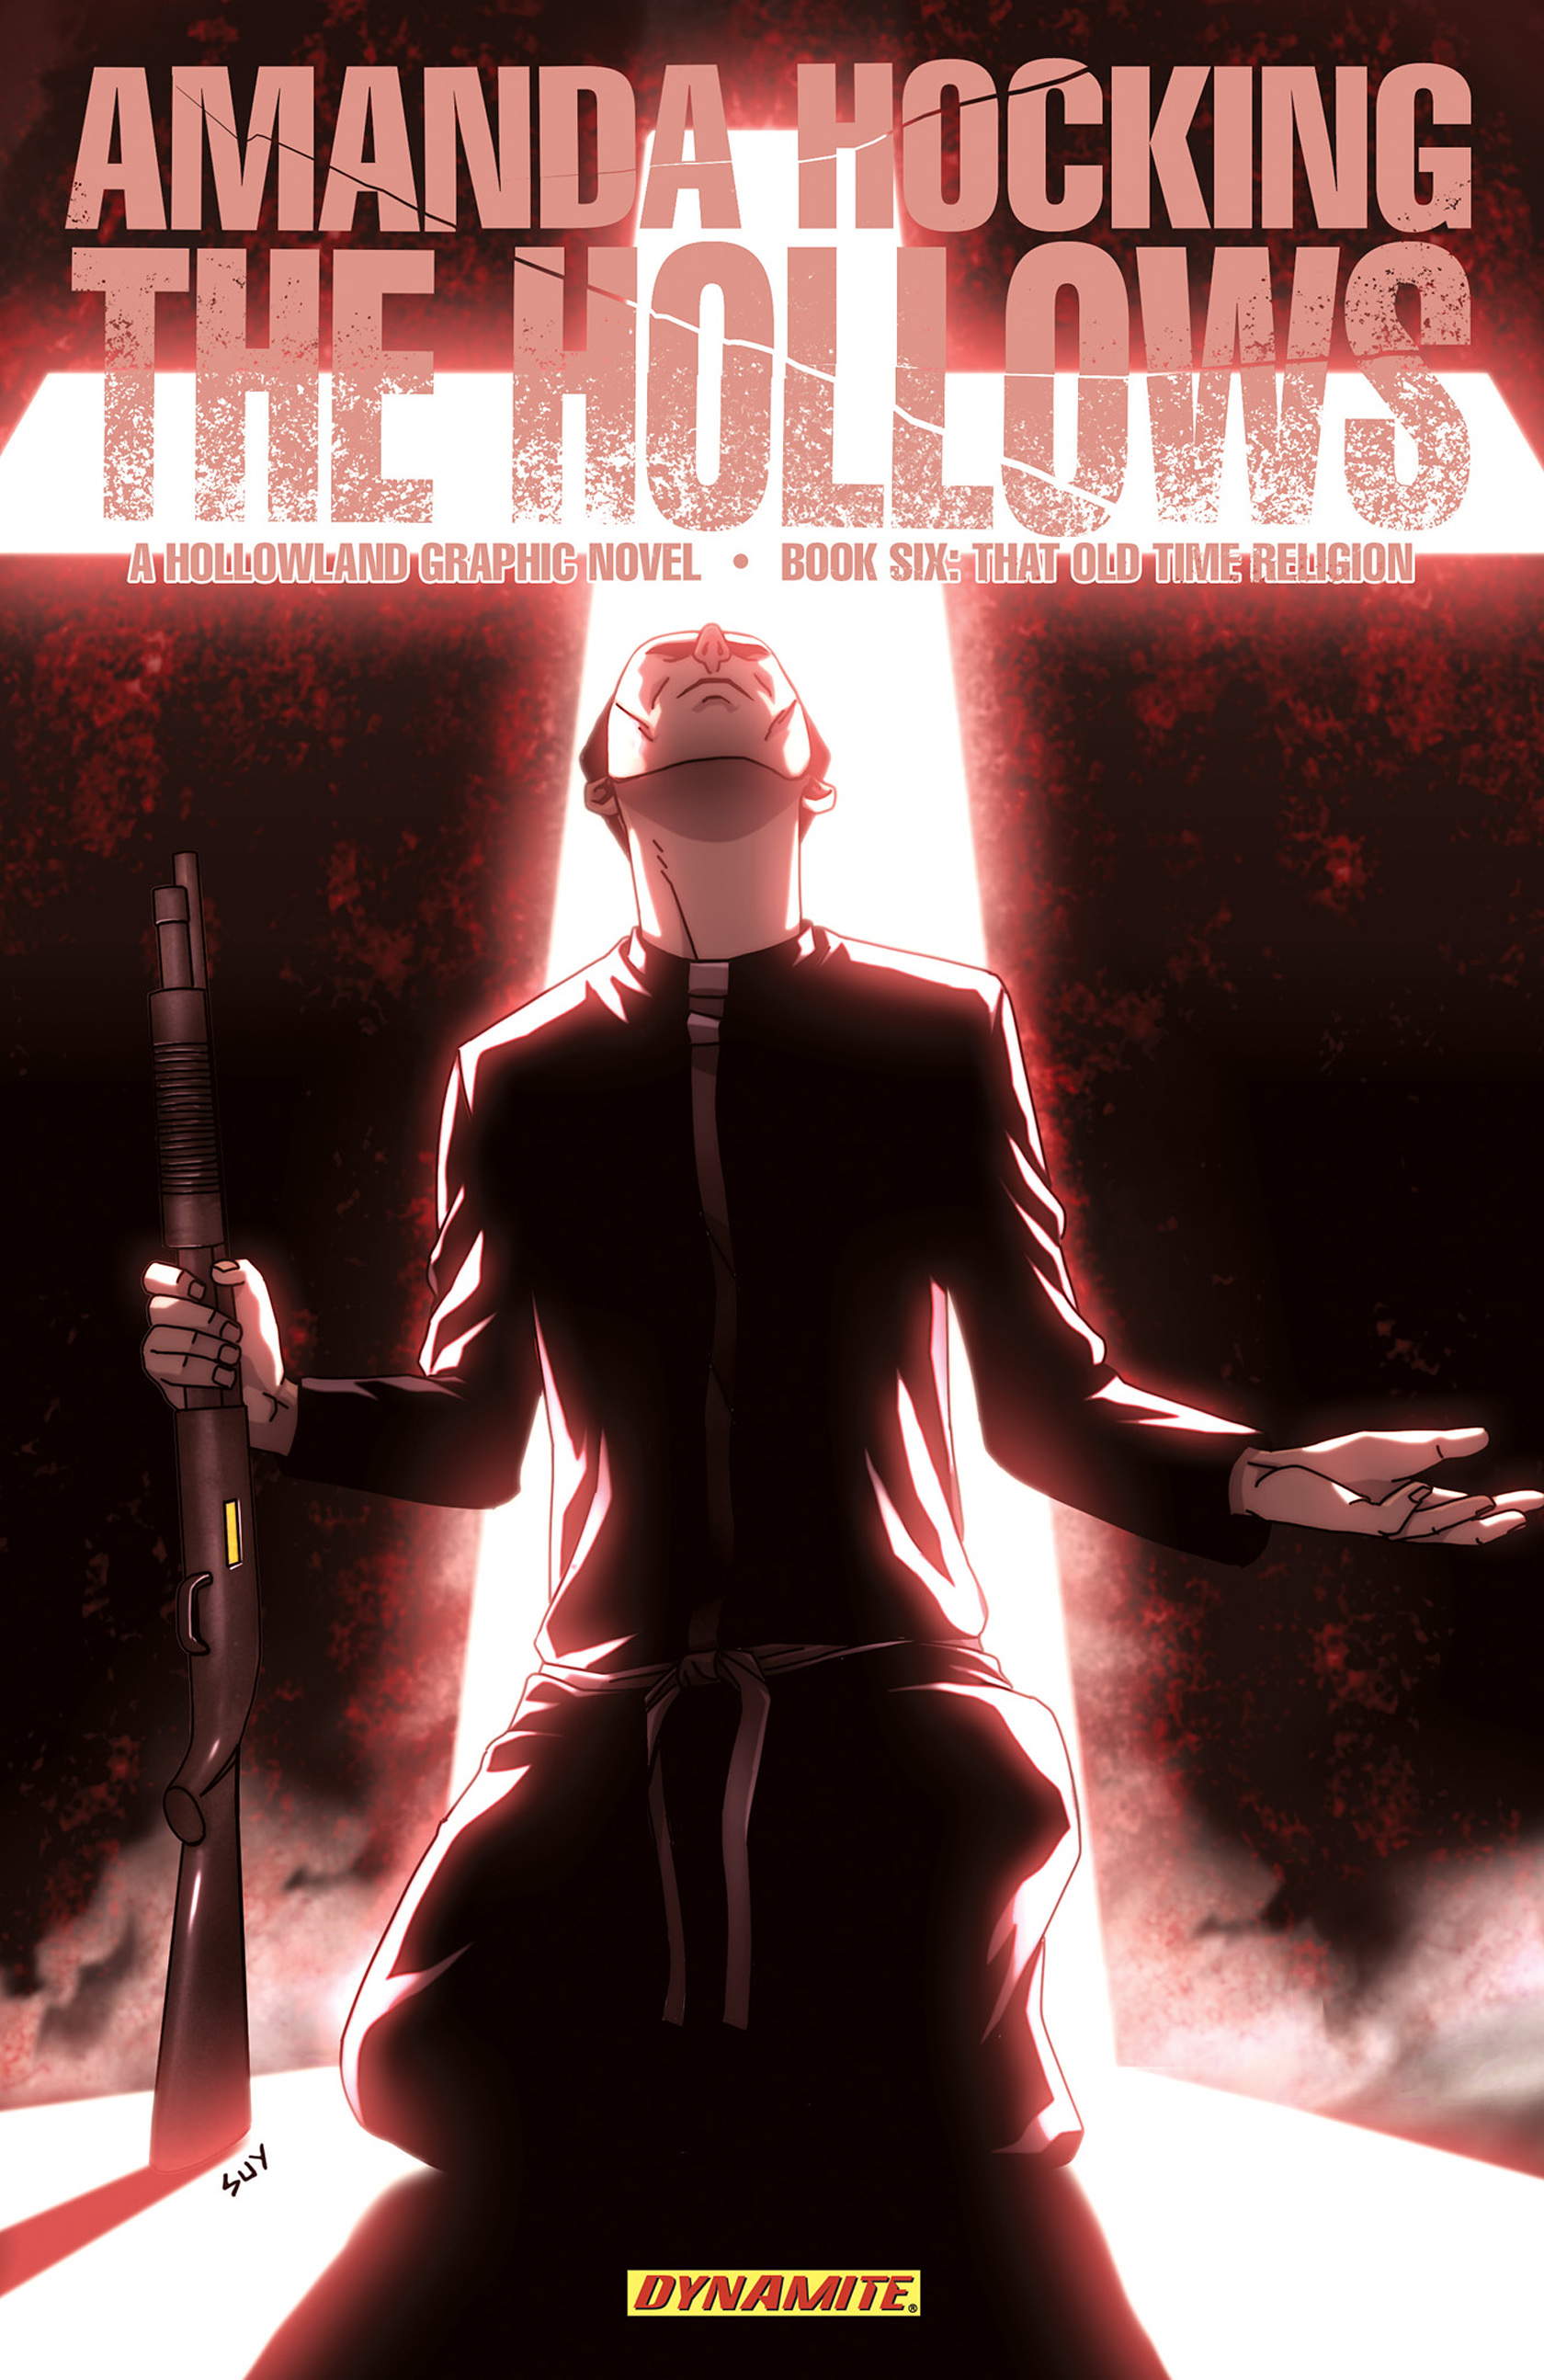 Read online Amanda Hocking's The Hollows: A Hollowland Graphic Novel comic -  Issue #6 - 1